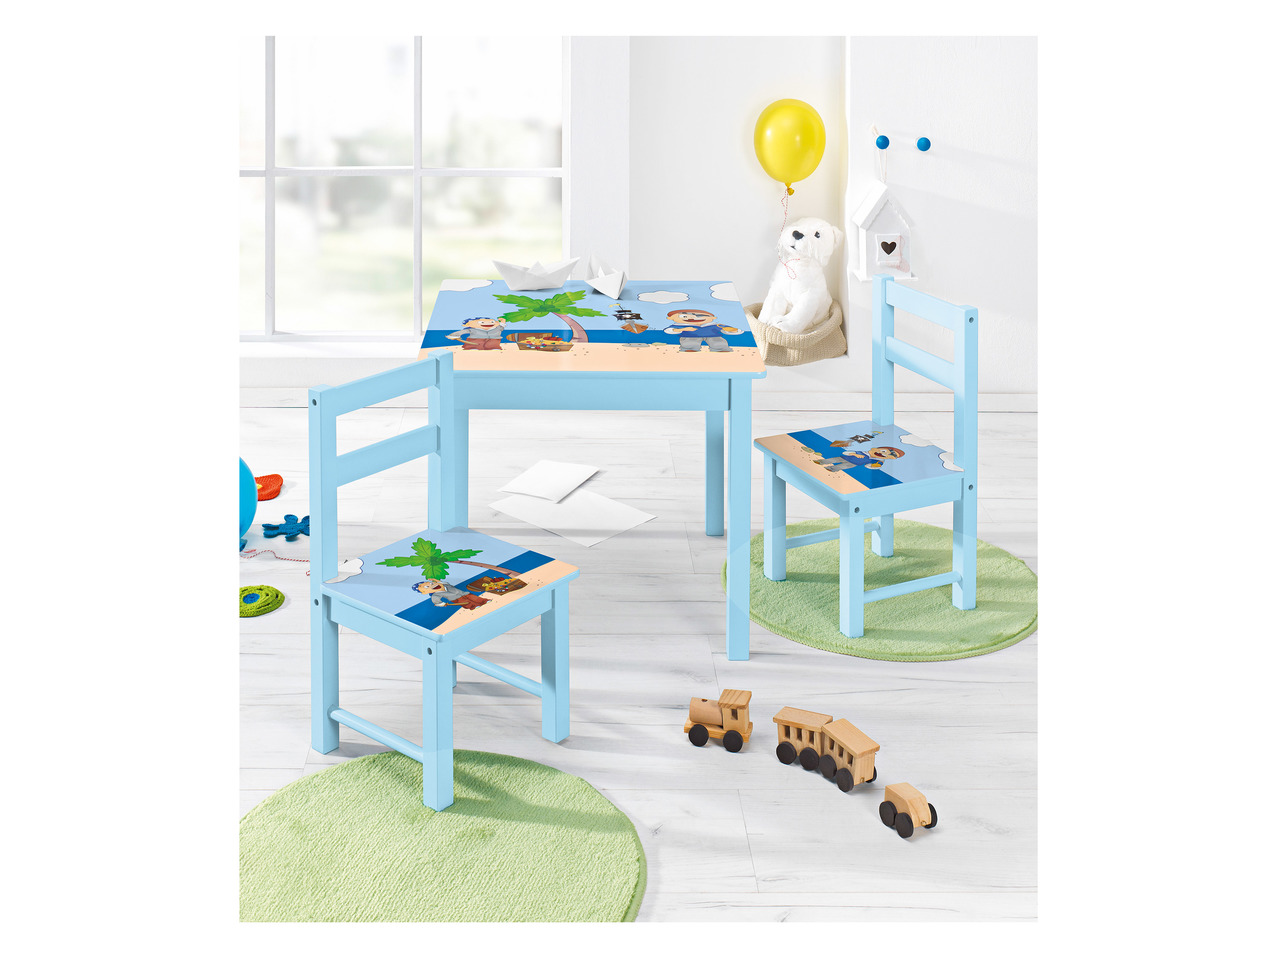 Livarno Living Kids' Table with 2 Chairs1